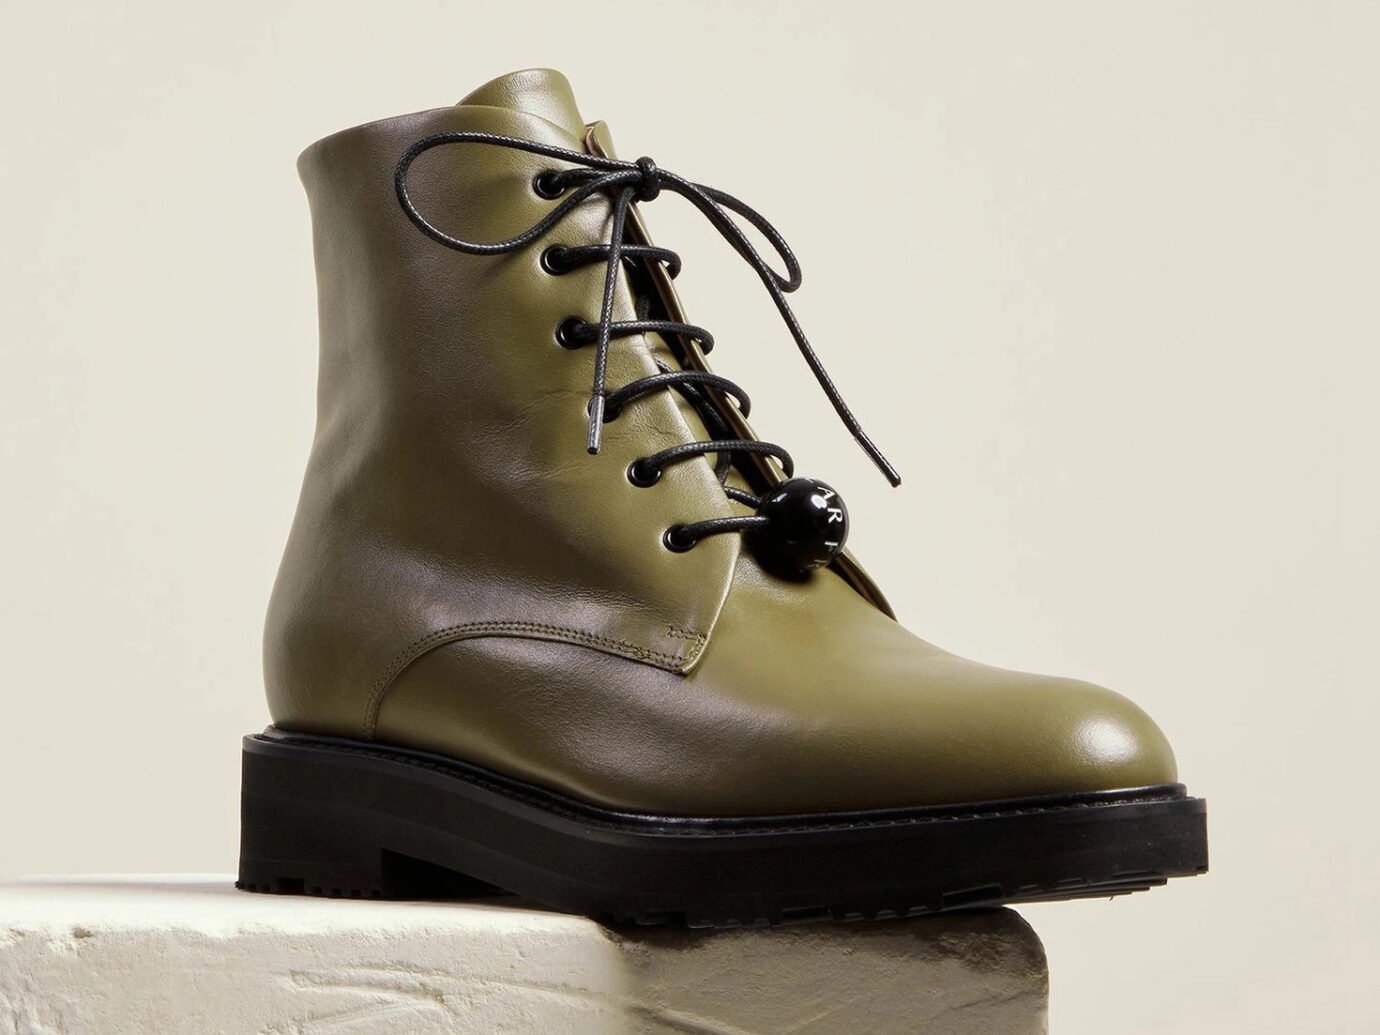 women's leather combat style boots